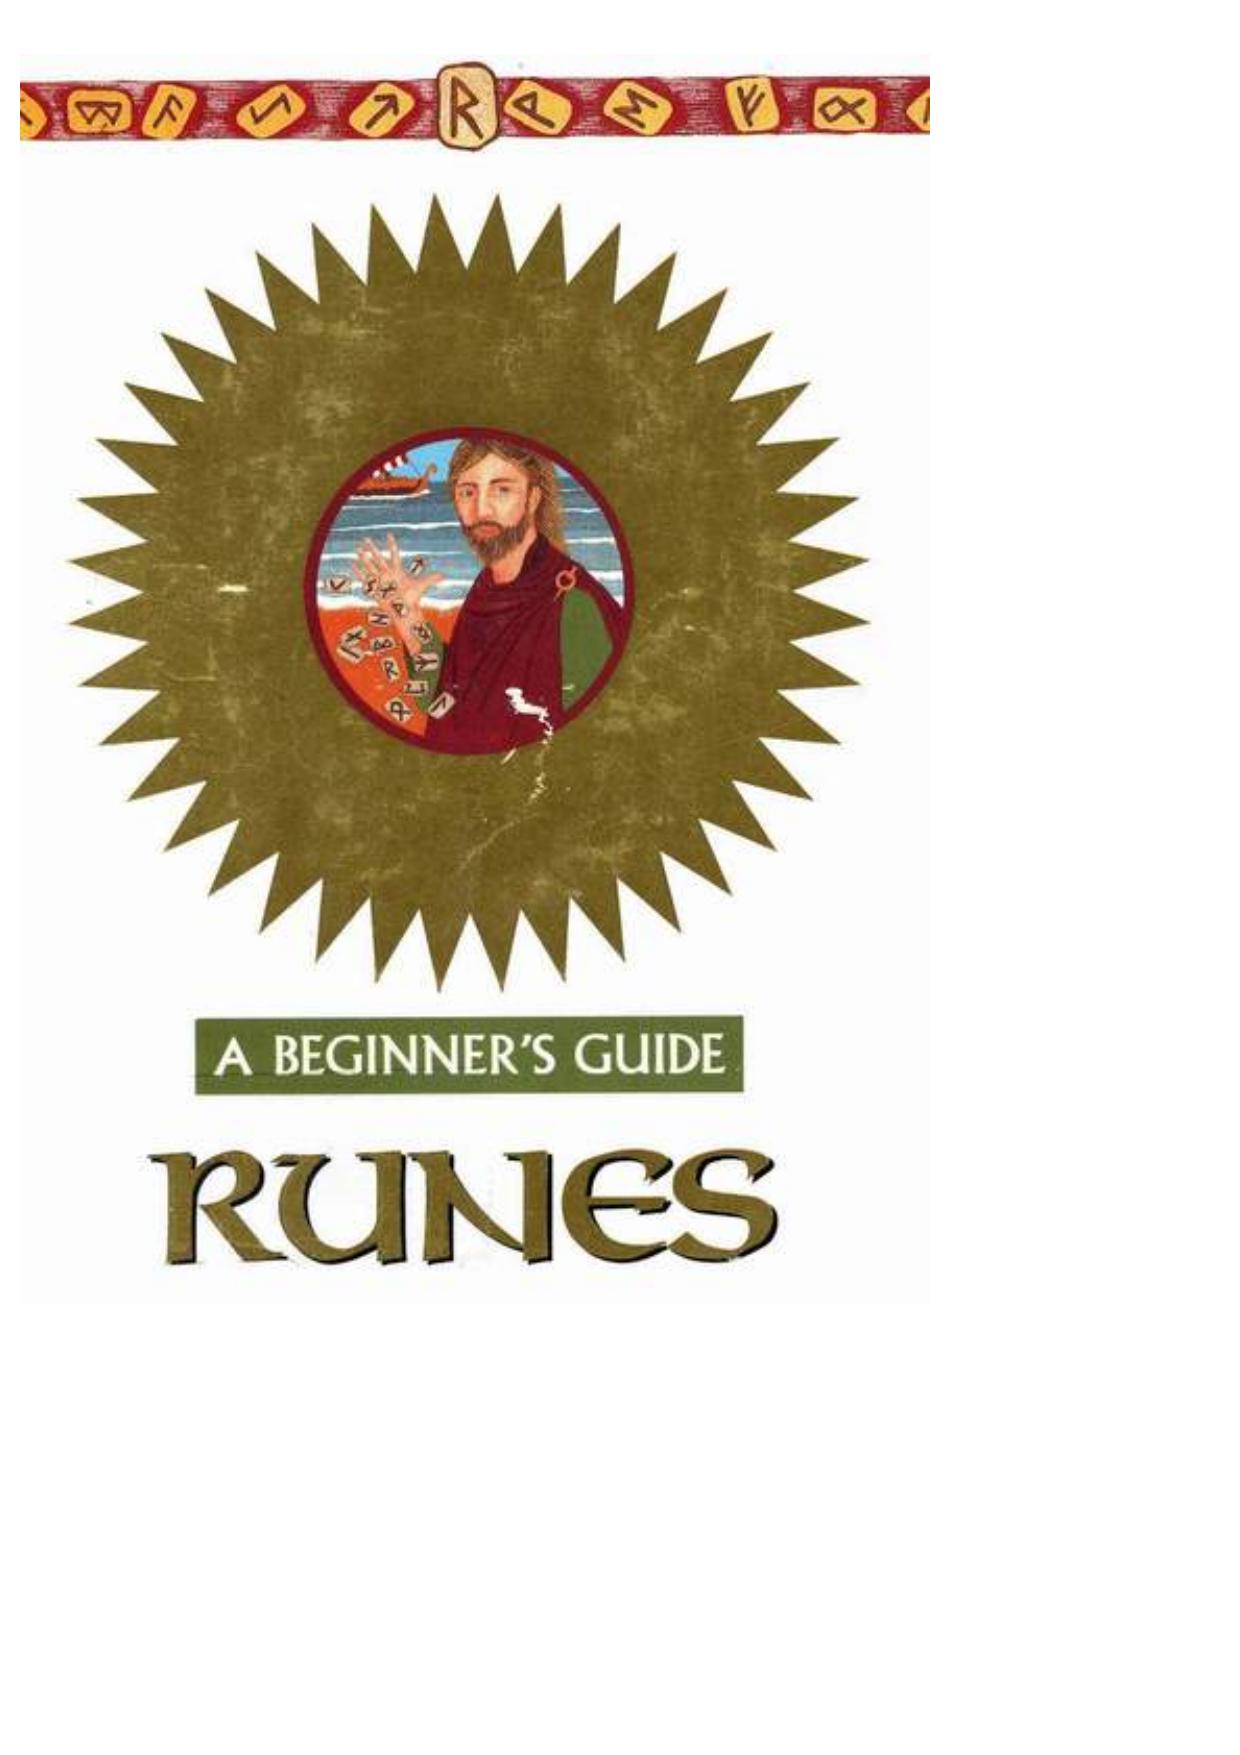 A Beginner's Guide to Runes